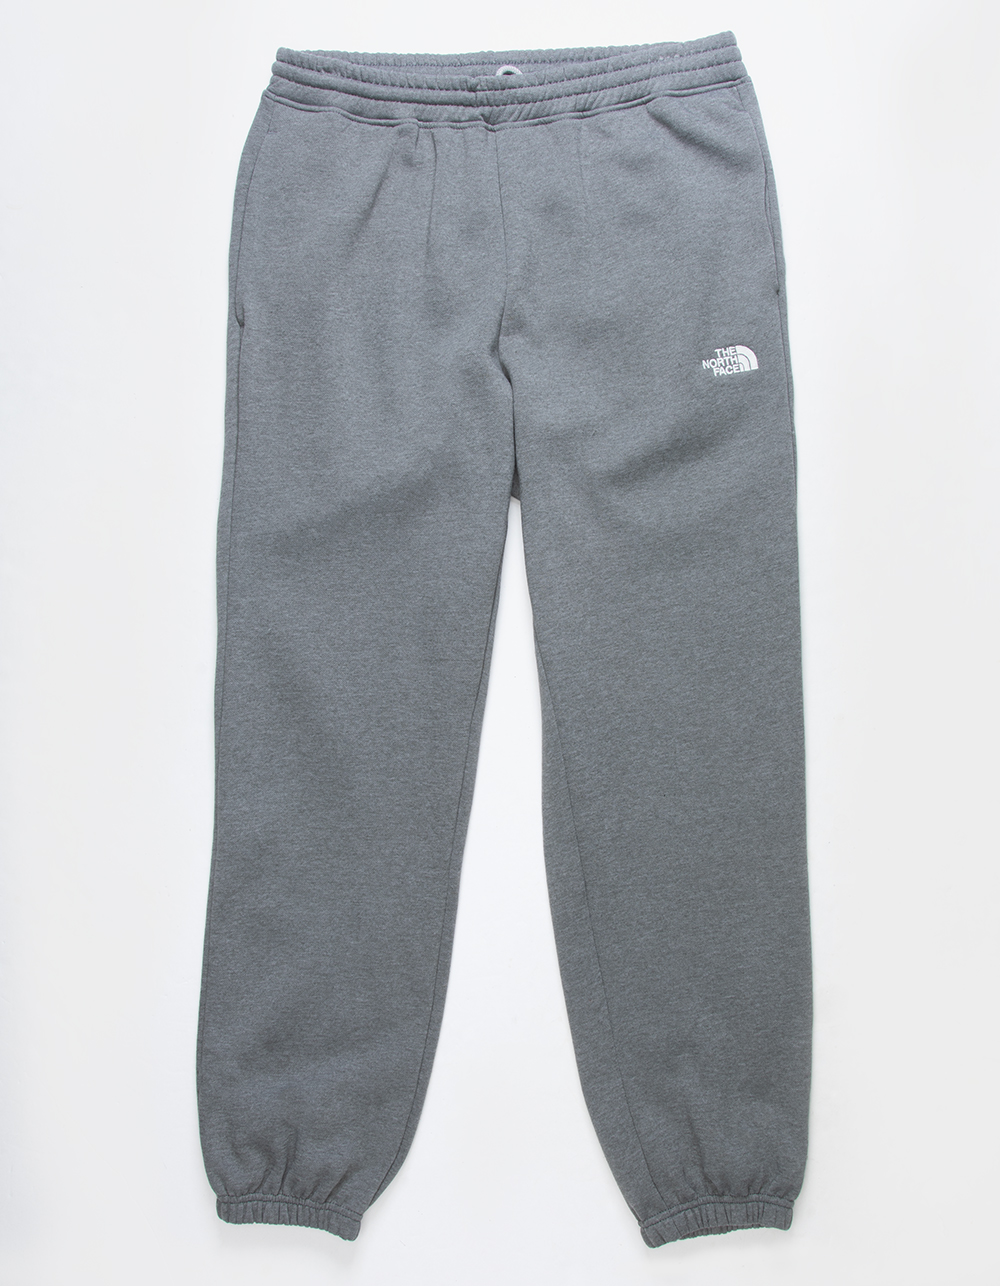 THE NORTH FACE Half Dome Mens Sweatpants - HEATHER GRAY | Tillys